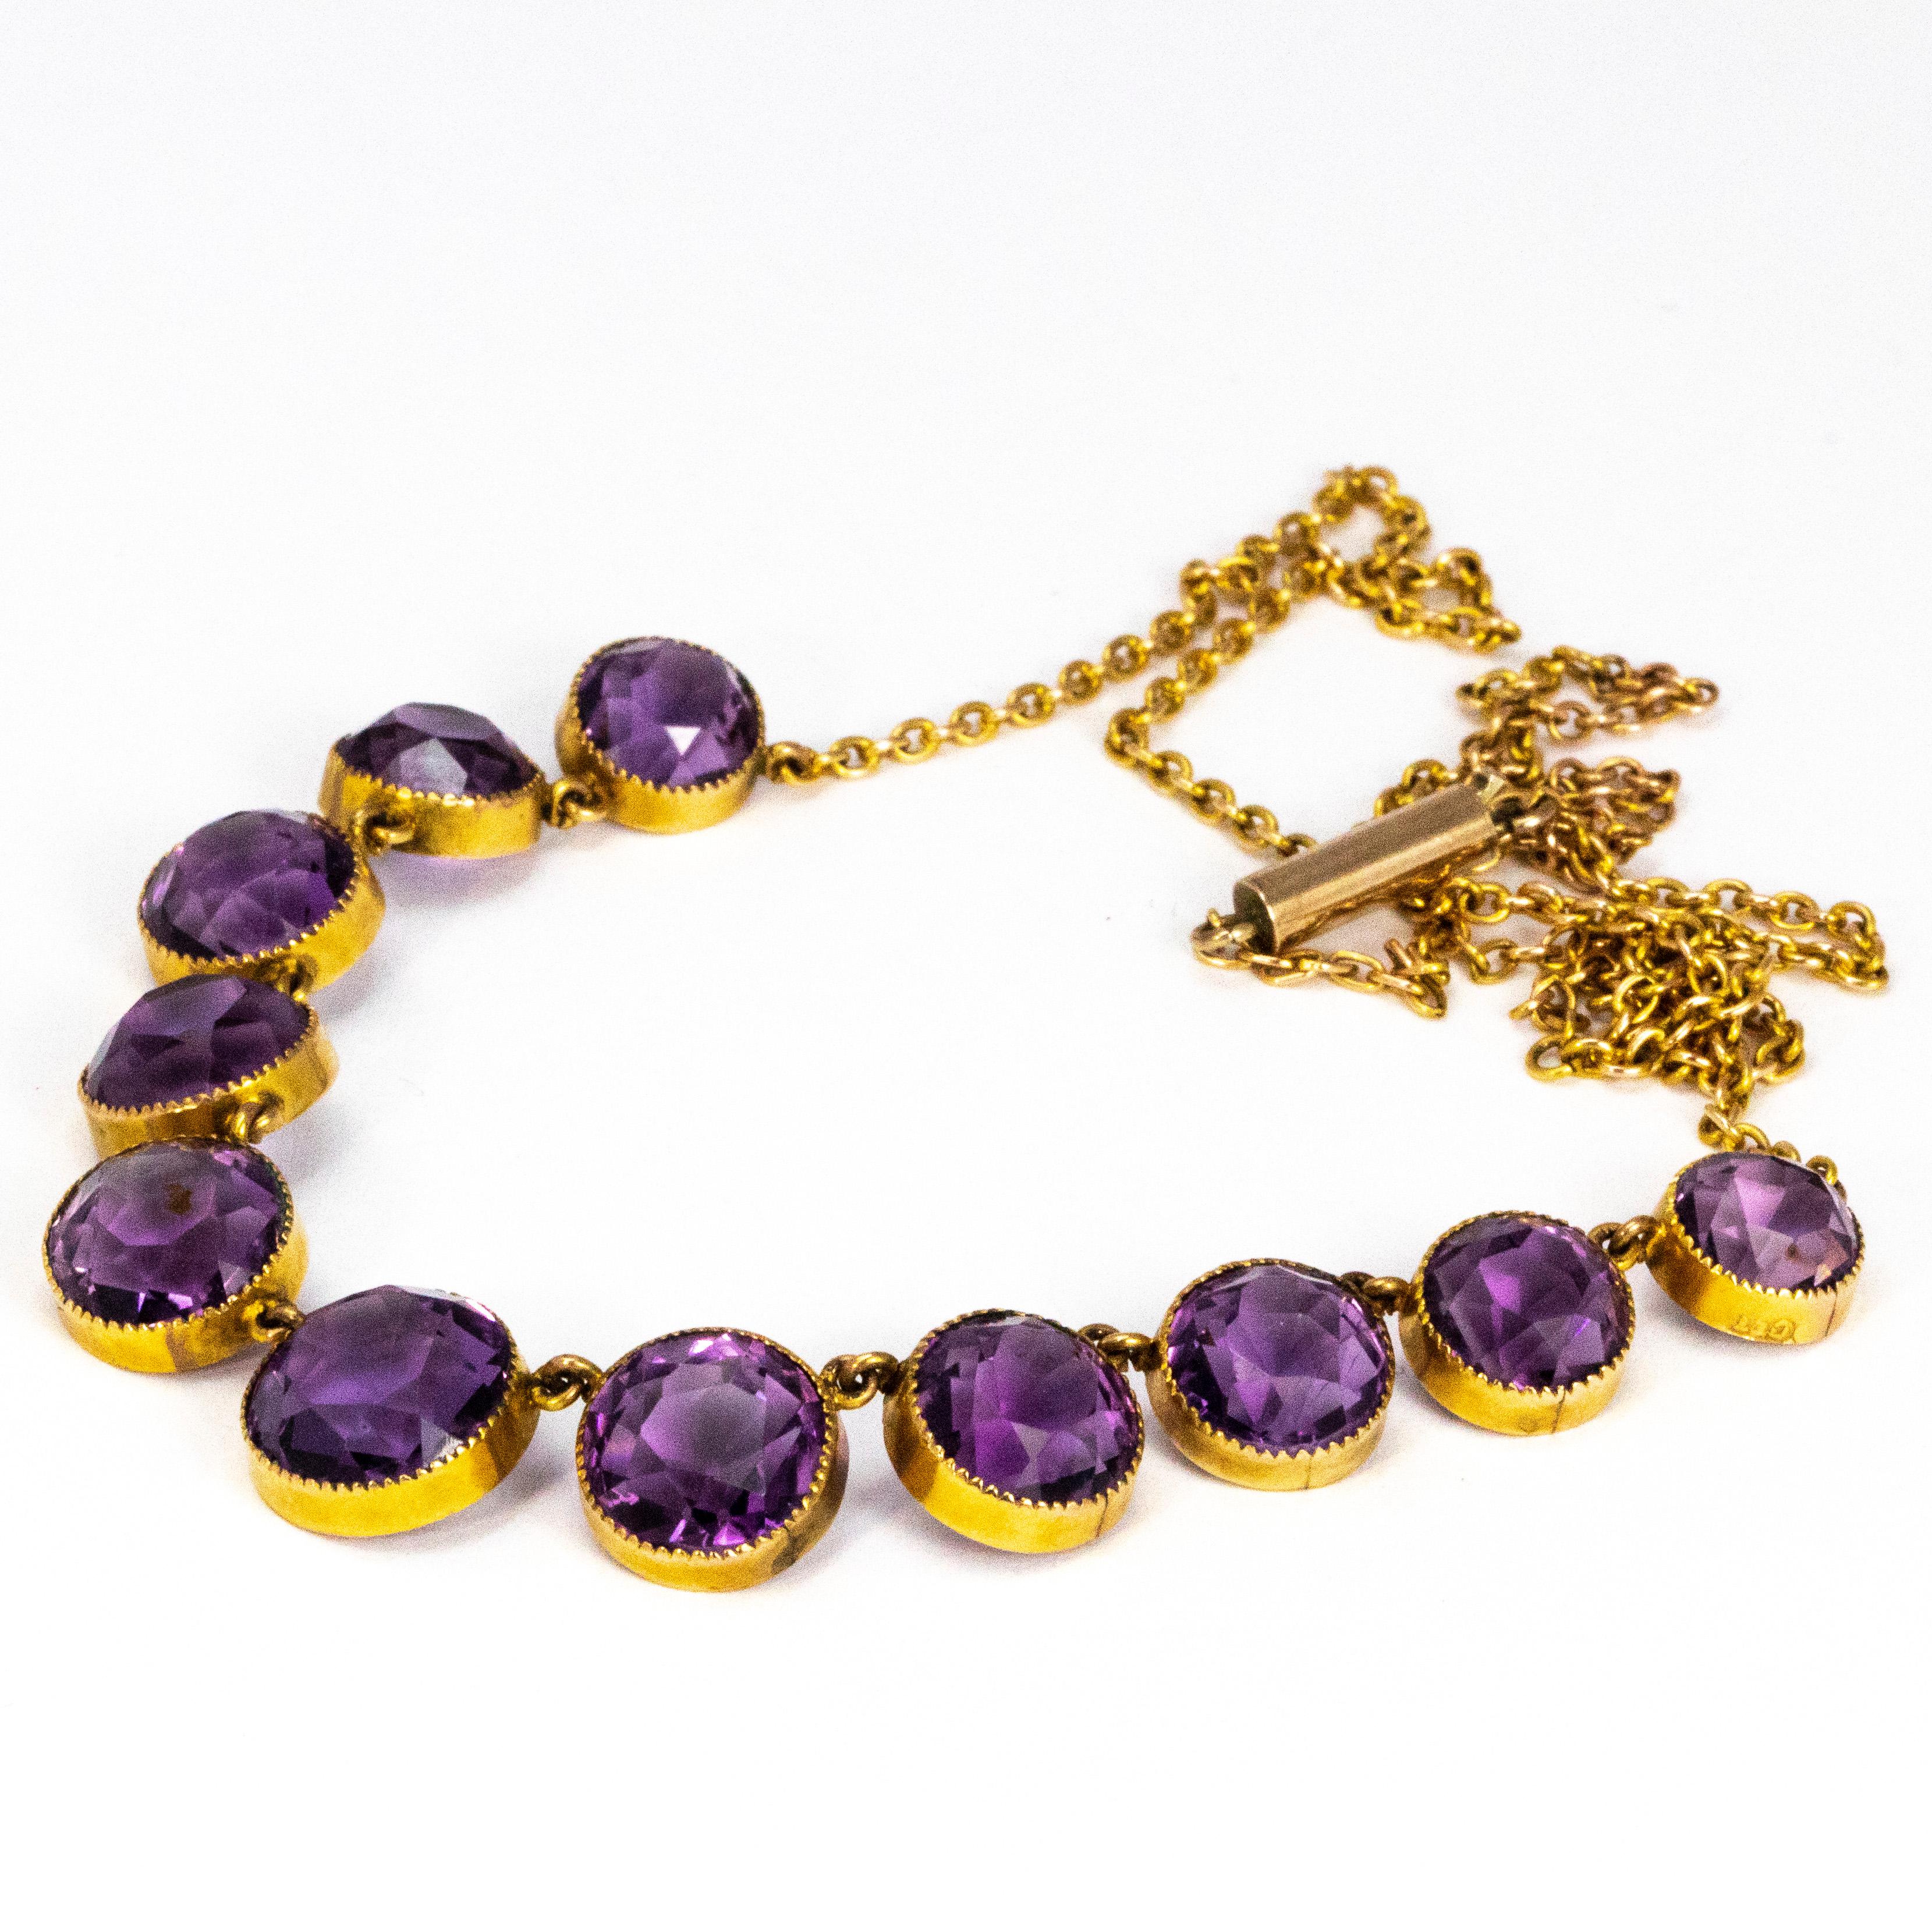 Eleven stunning bright purple amethyst stones adorn this necklace. The largest stone measures 10mm in diameter and the smallest goes down to 7.5mm. The 9ct gold chains delicate compared to the chunky stones and is fastened using a barrel